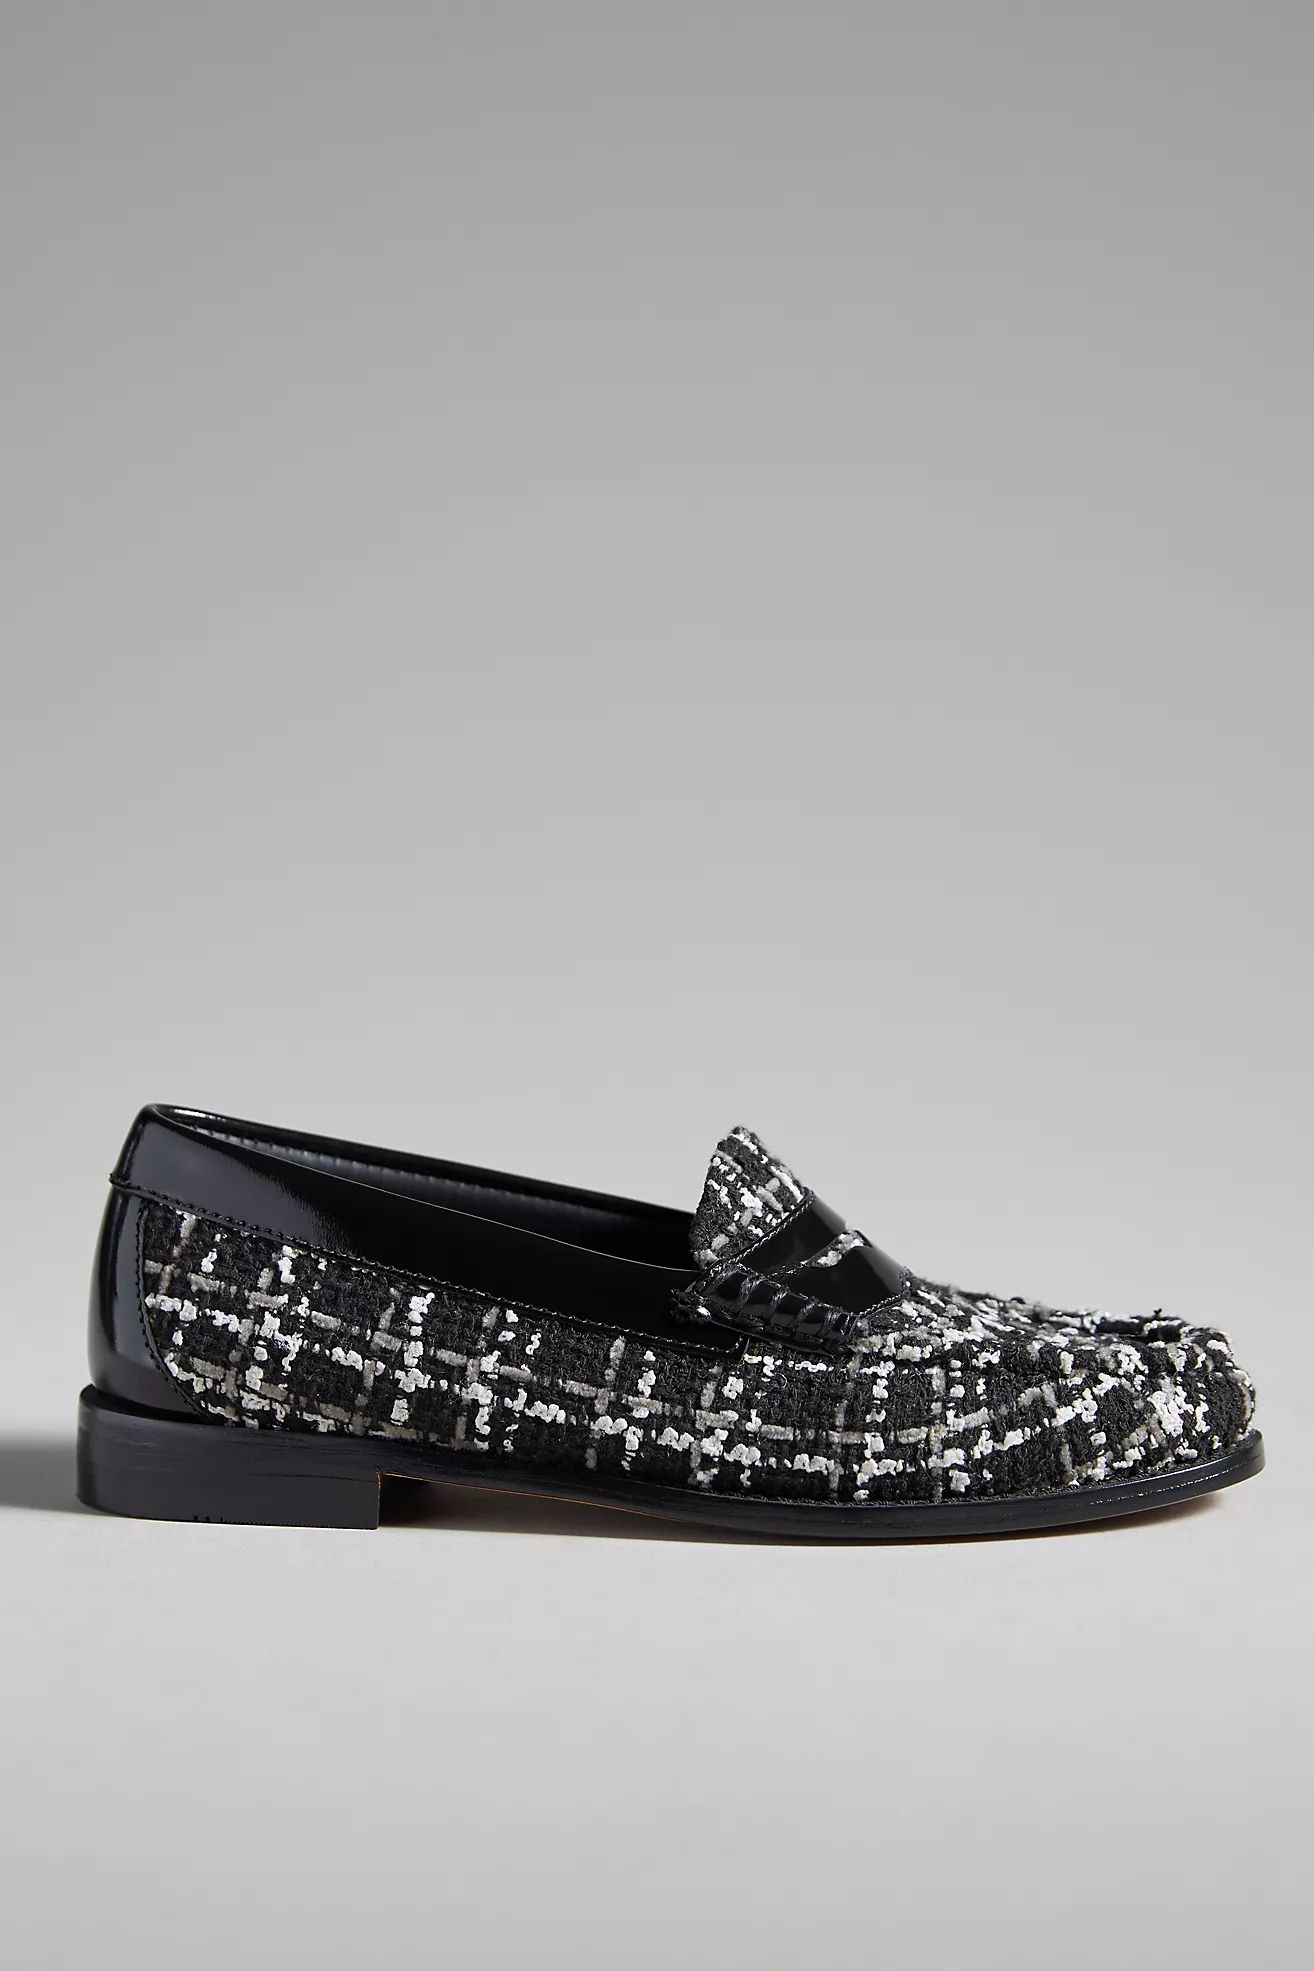 G.H.BASS Whitney Tweed Weejuns® Loafers | Anthropologie (US)